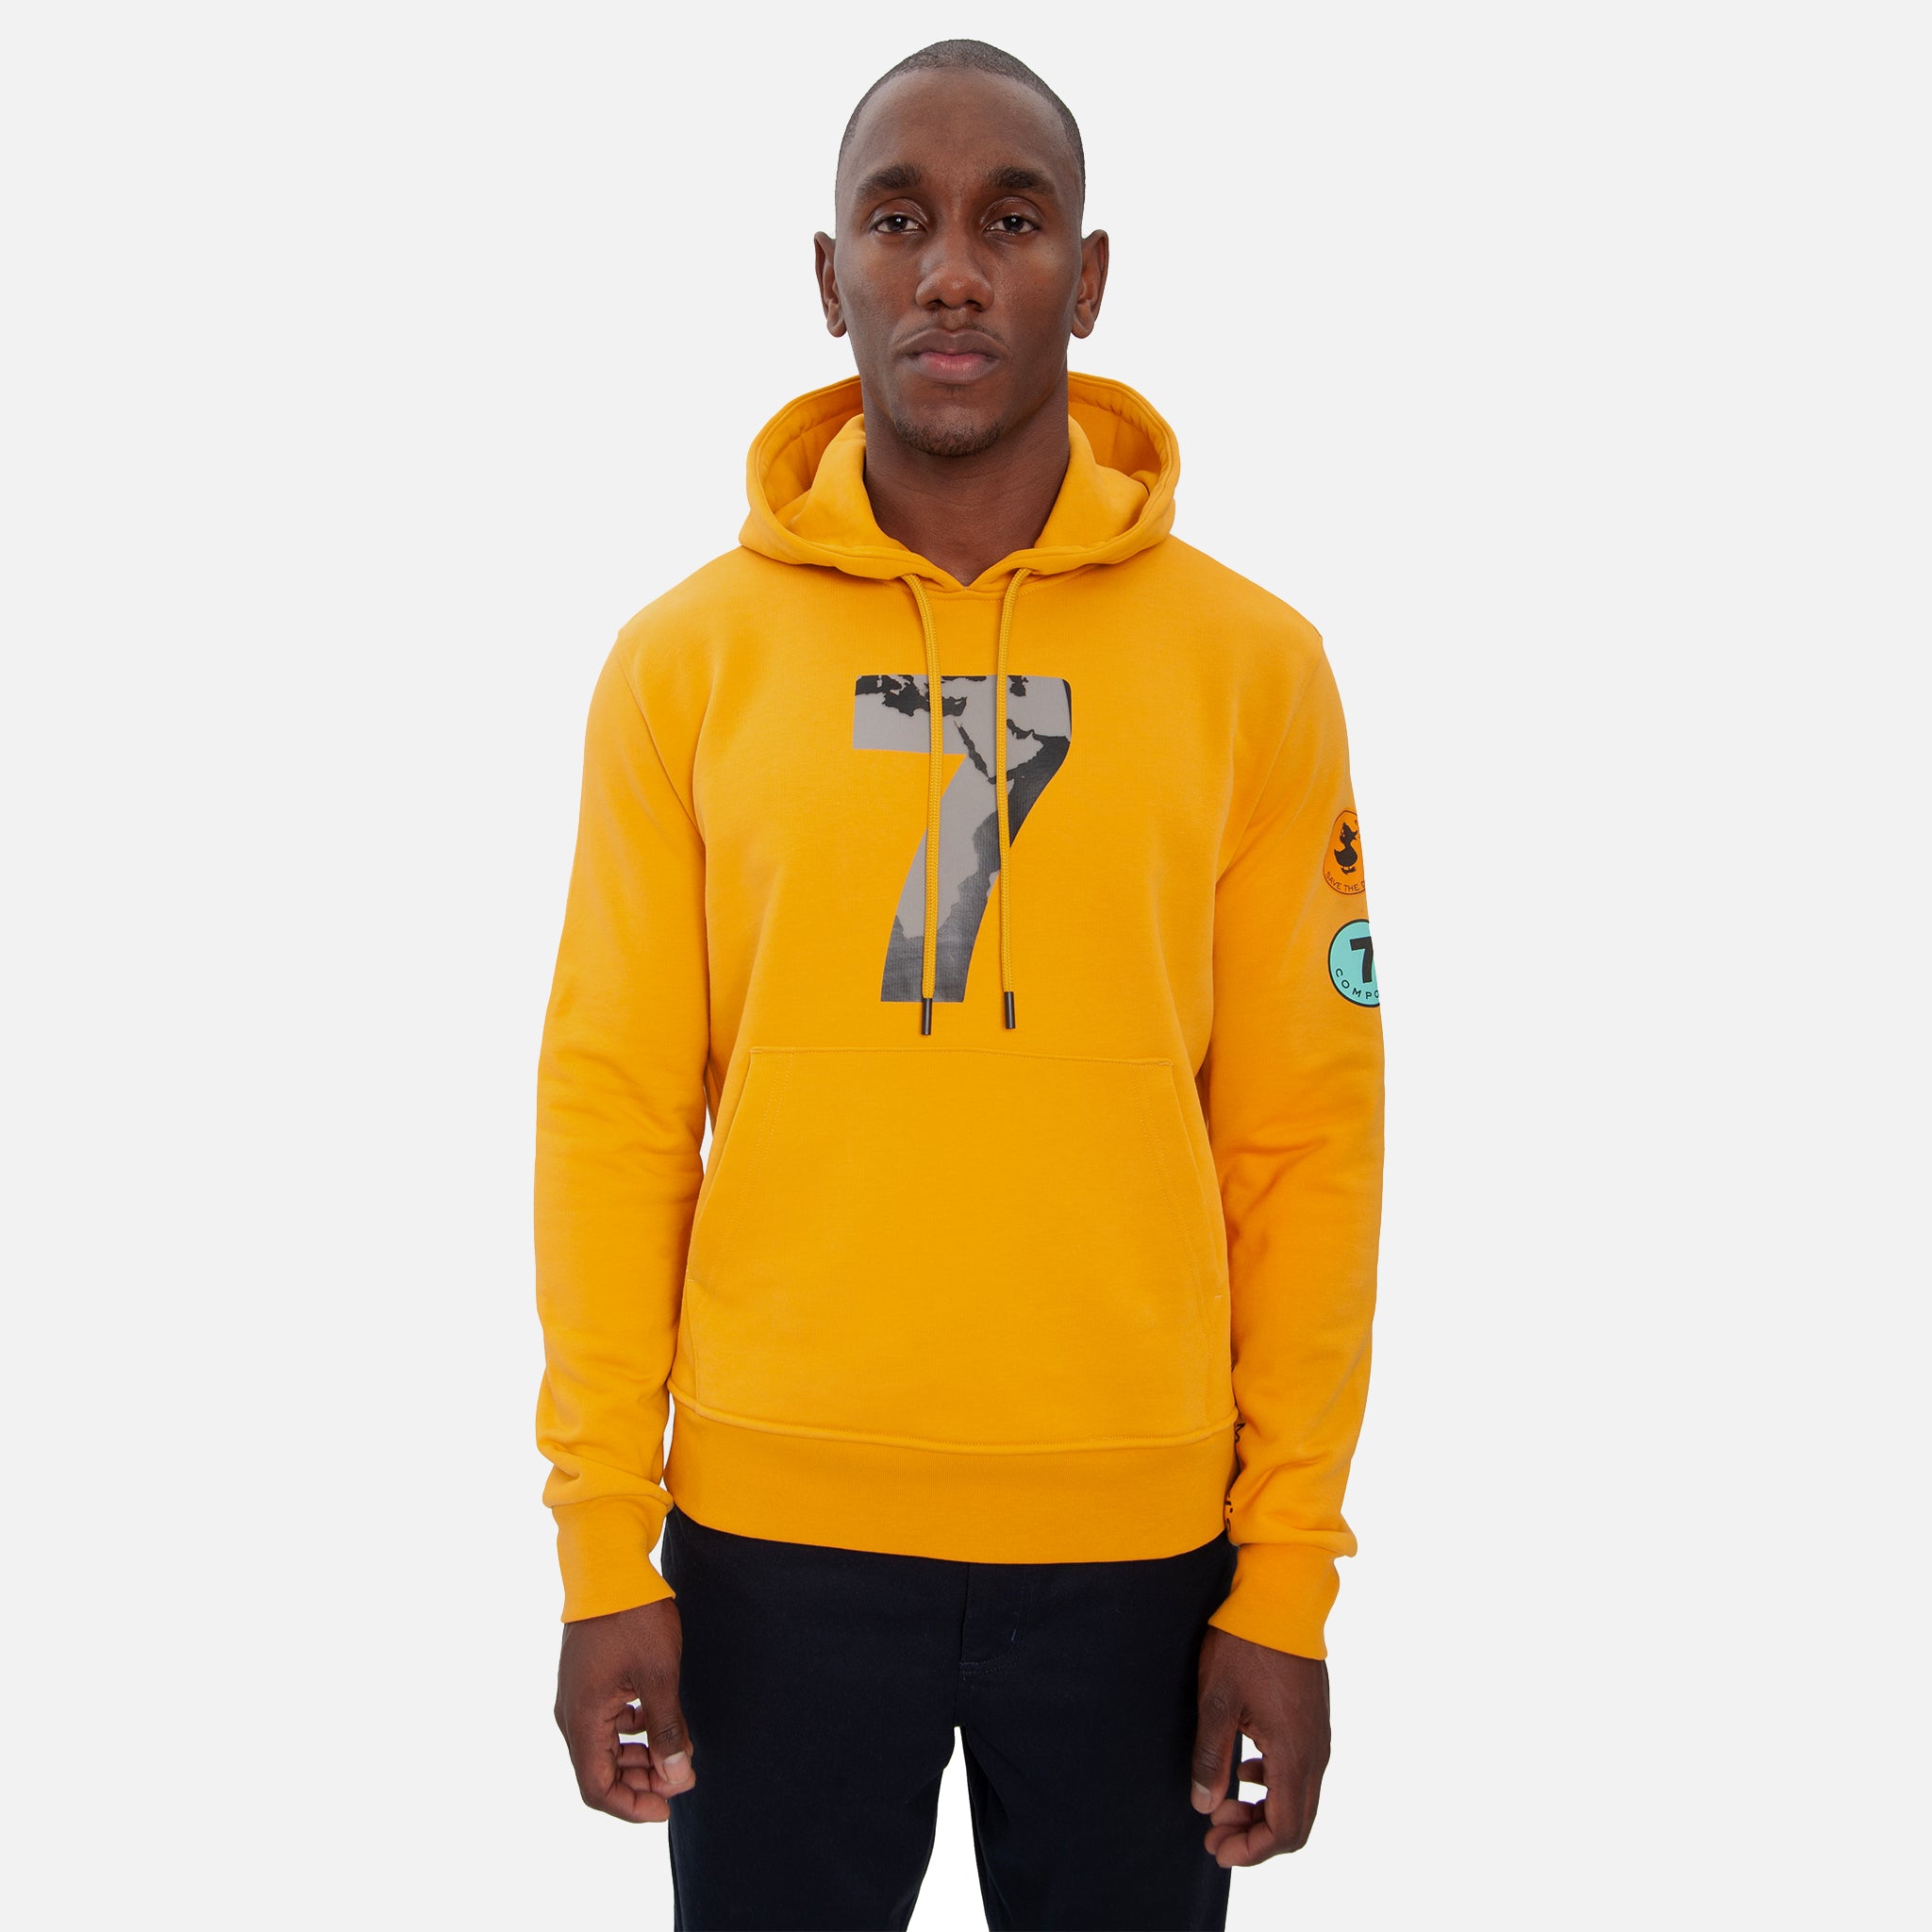 COMPOUND X SAVE THE DUCK "7" HOODIE - YELLOW / BLACK